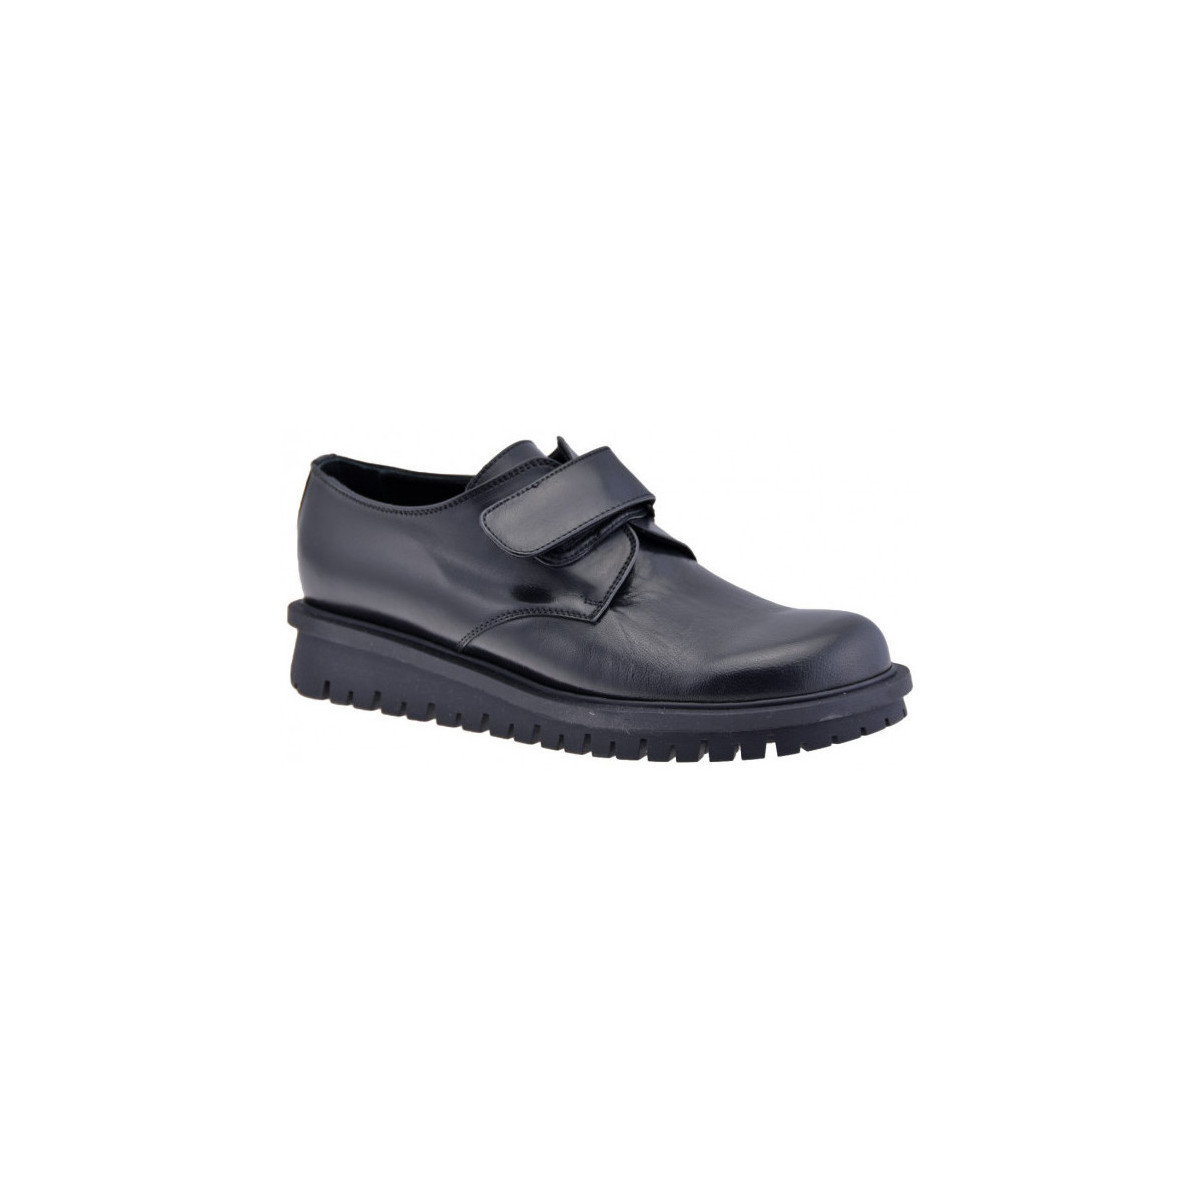 Chaussures Femme Baskets mode Dockmasters Casual Noir